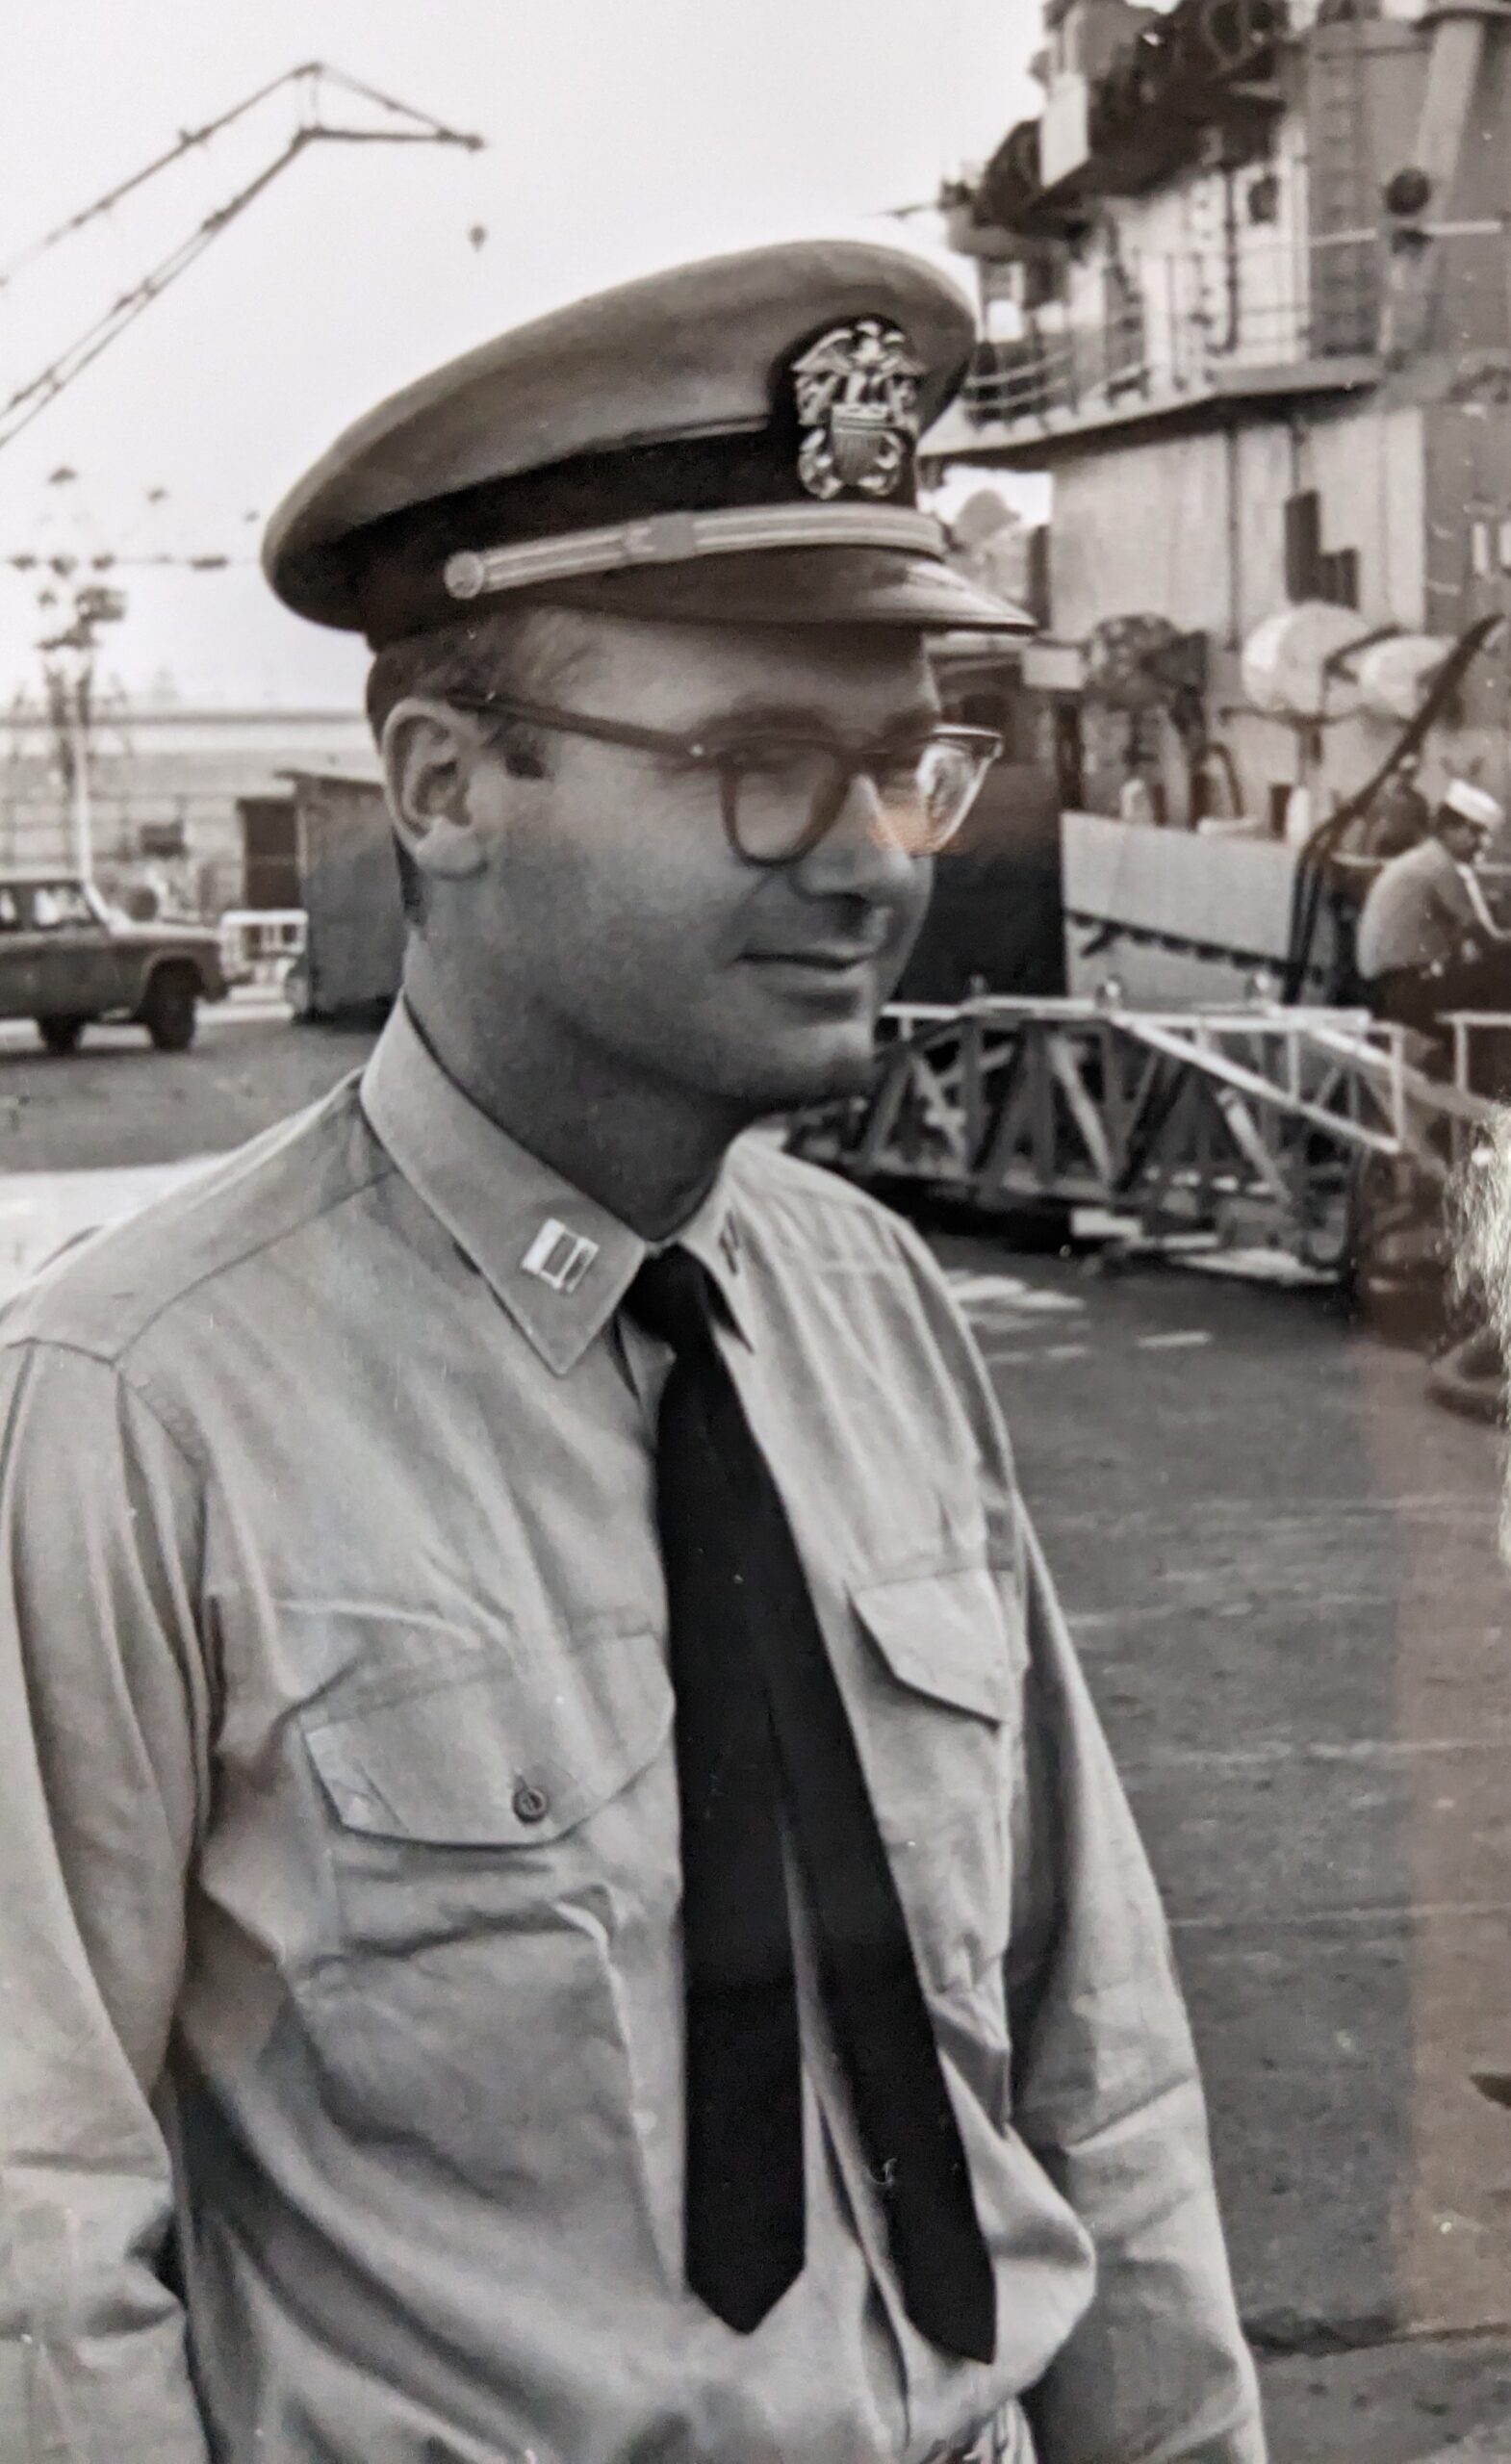 A Navy lieutenant in uniform with a ship in the background.